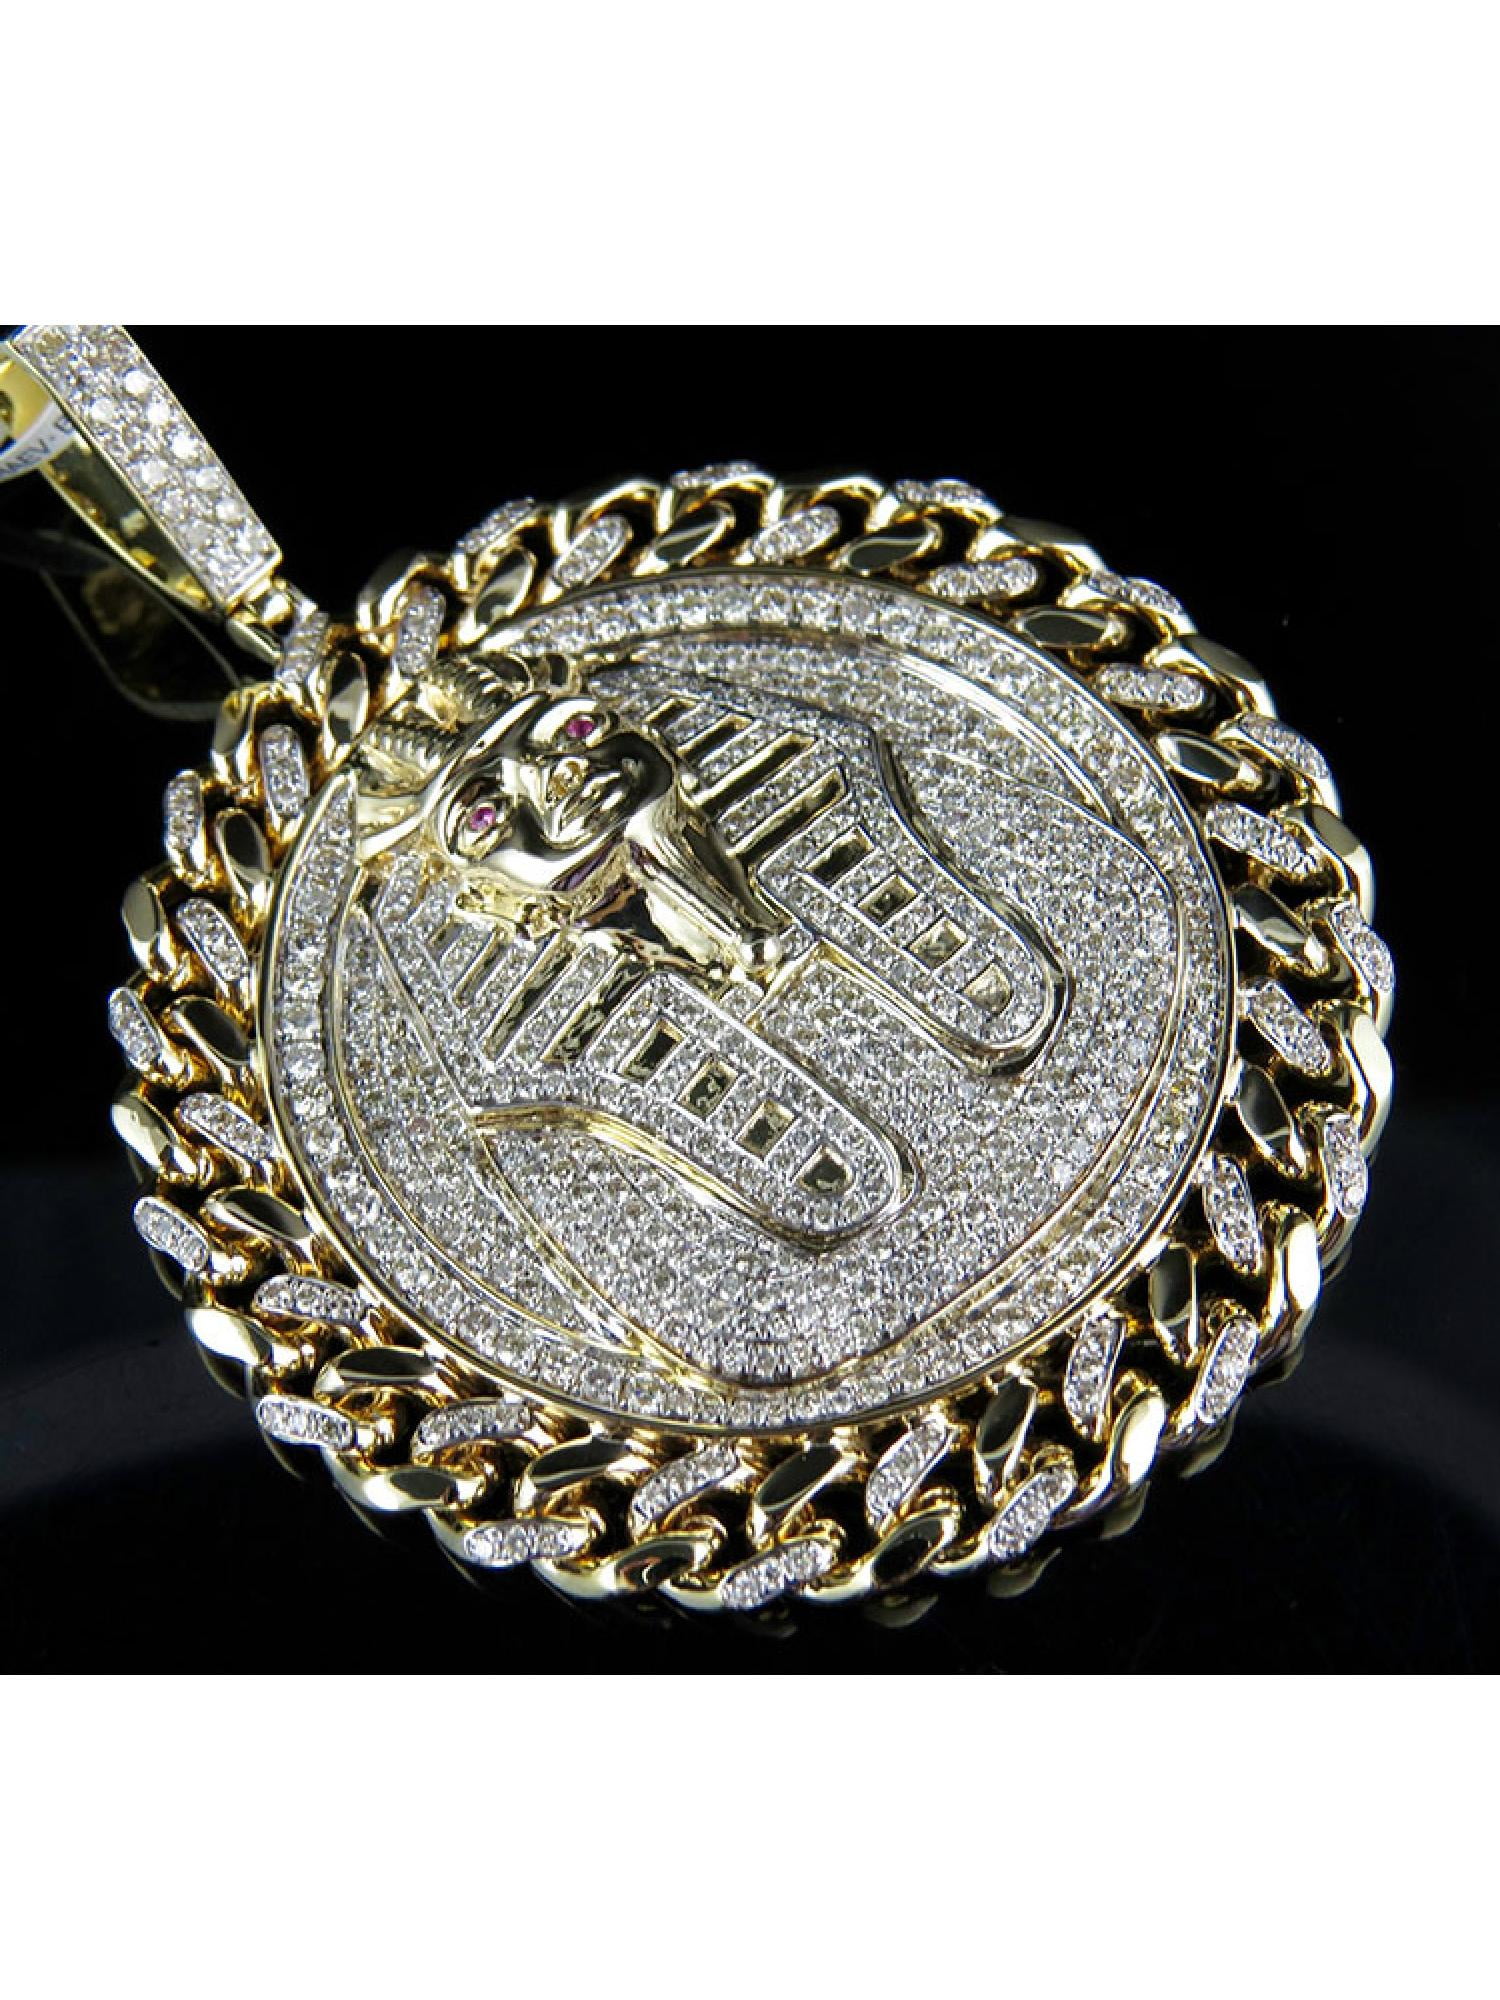 3 Diamonds 569 Pendant Necklaces Pharaoh Necklace Gold Plated Pharaonic -  Golden